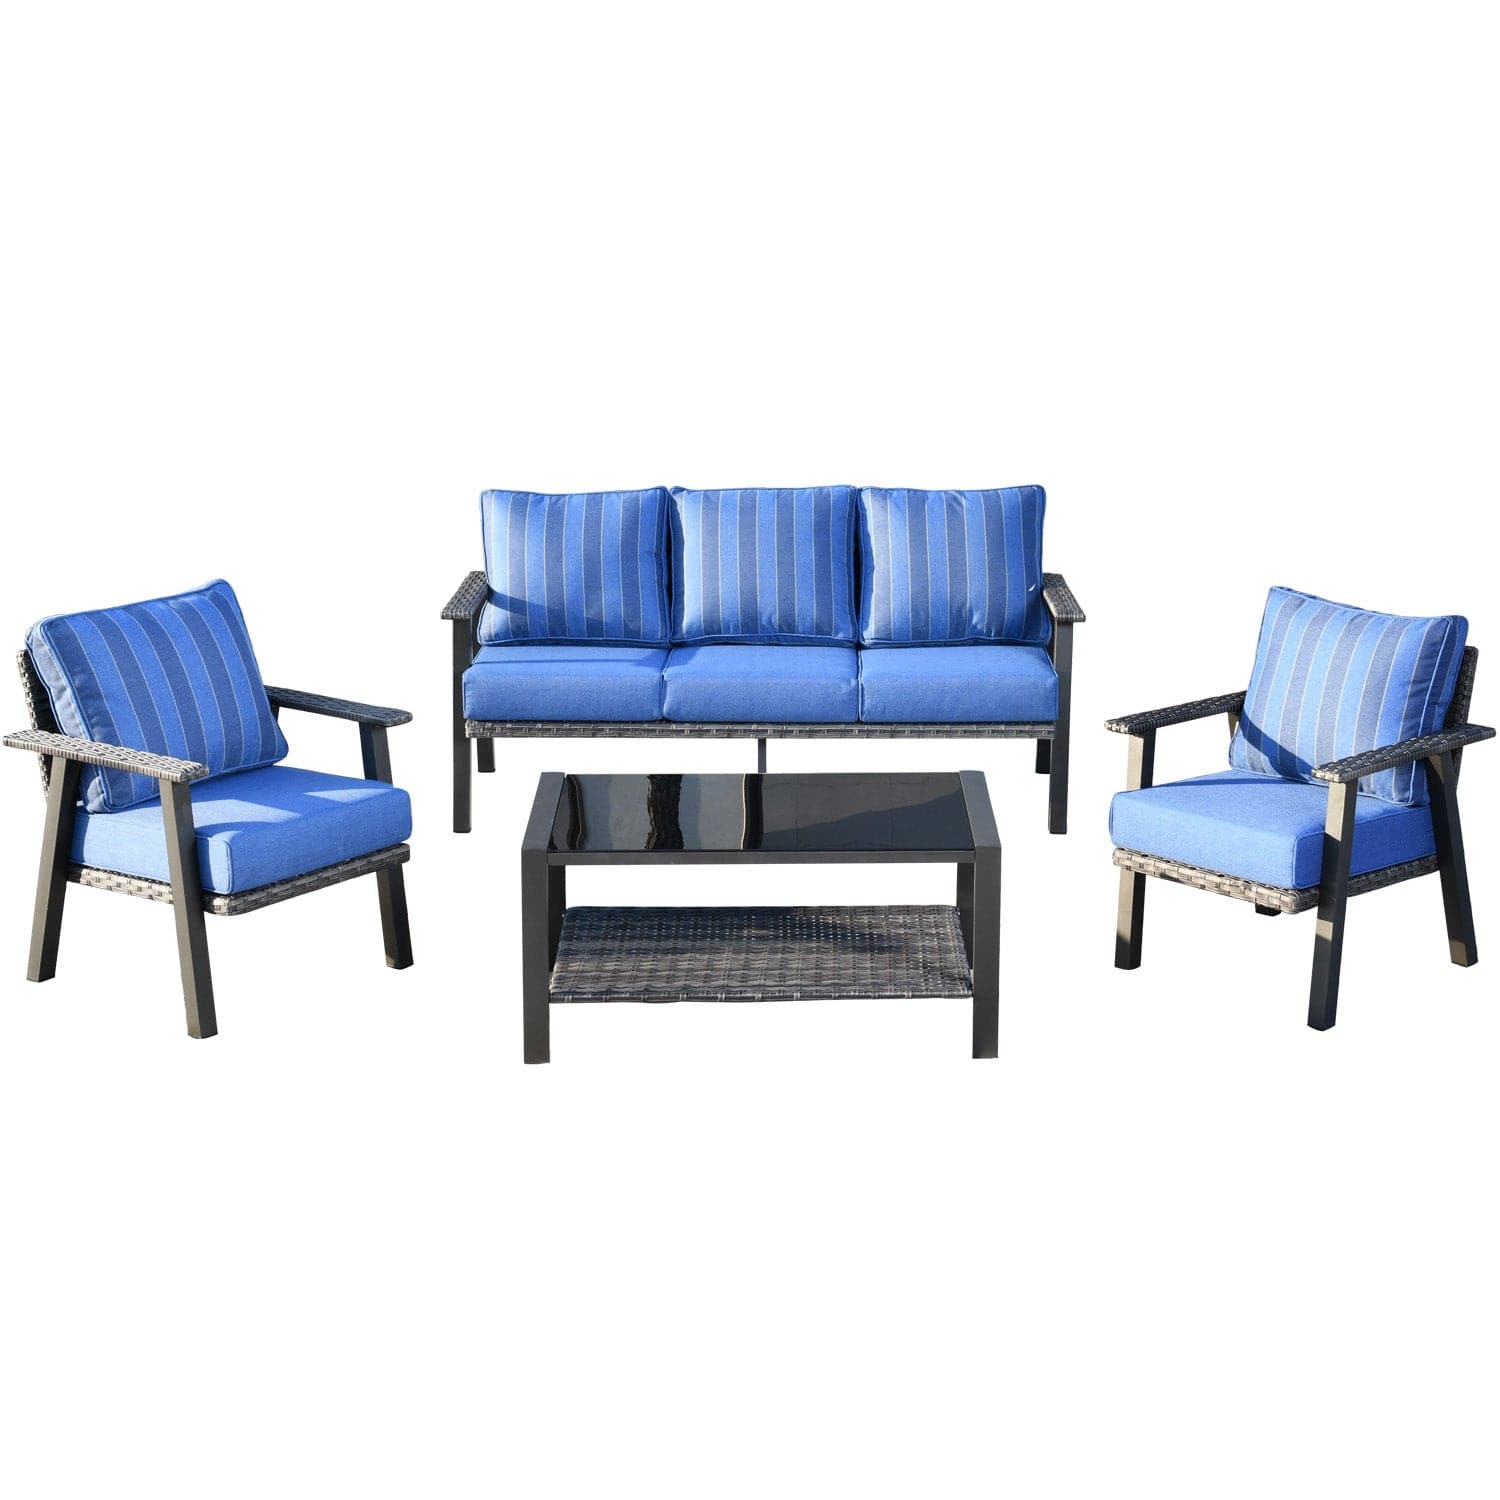 Ovios Patio Conversation Set 5 Person Seating with Table, 5'' Cushion, Olefin Fabric